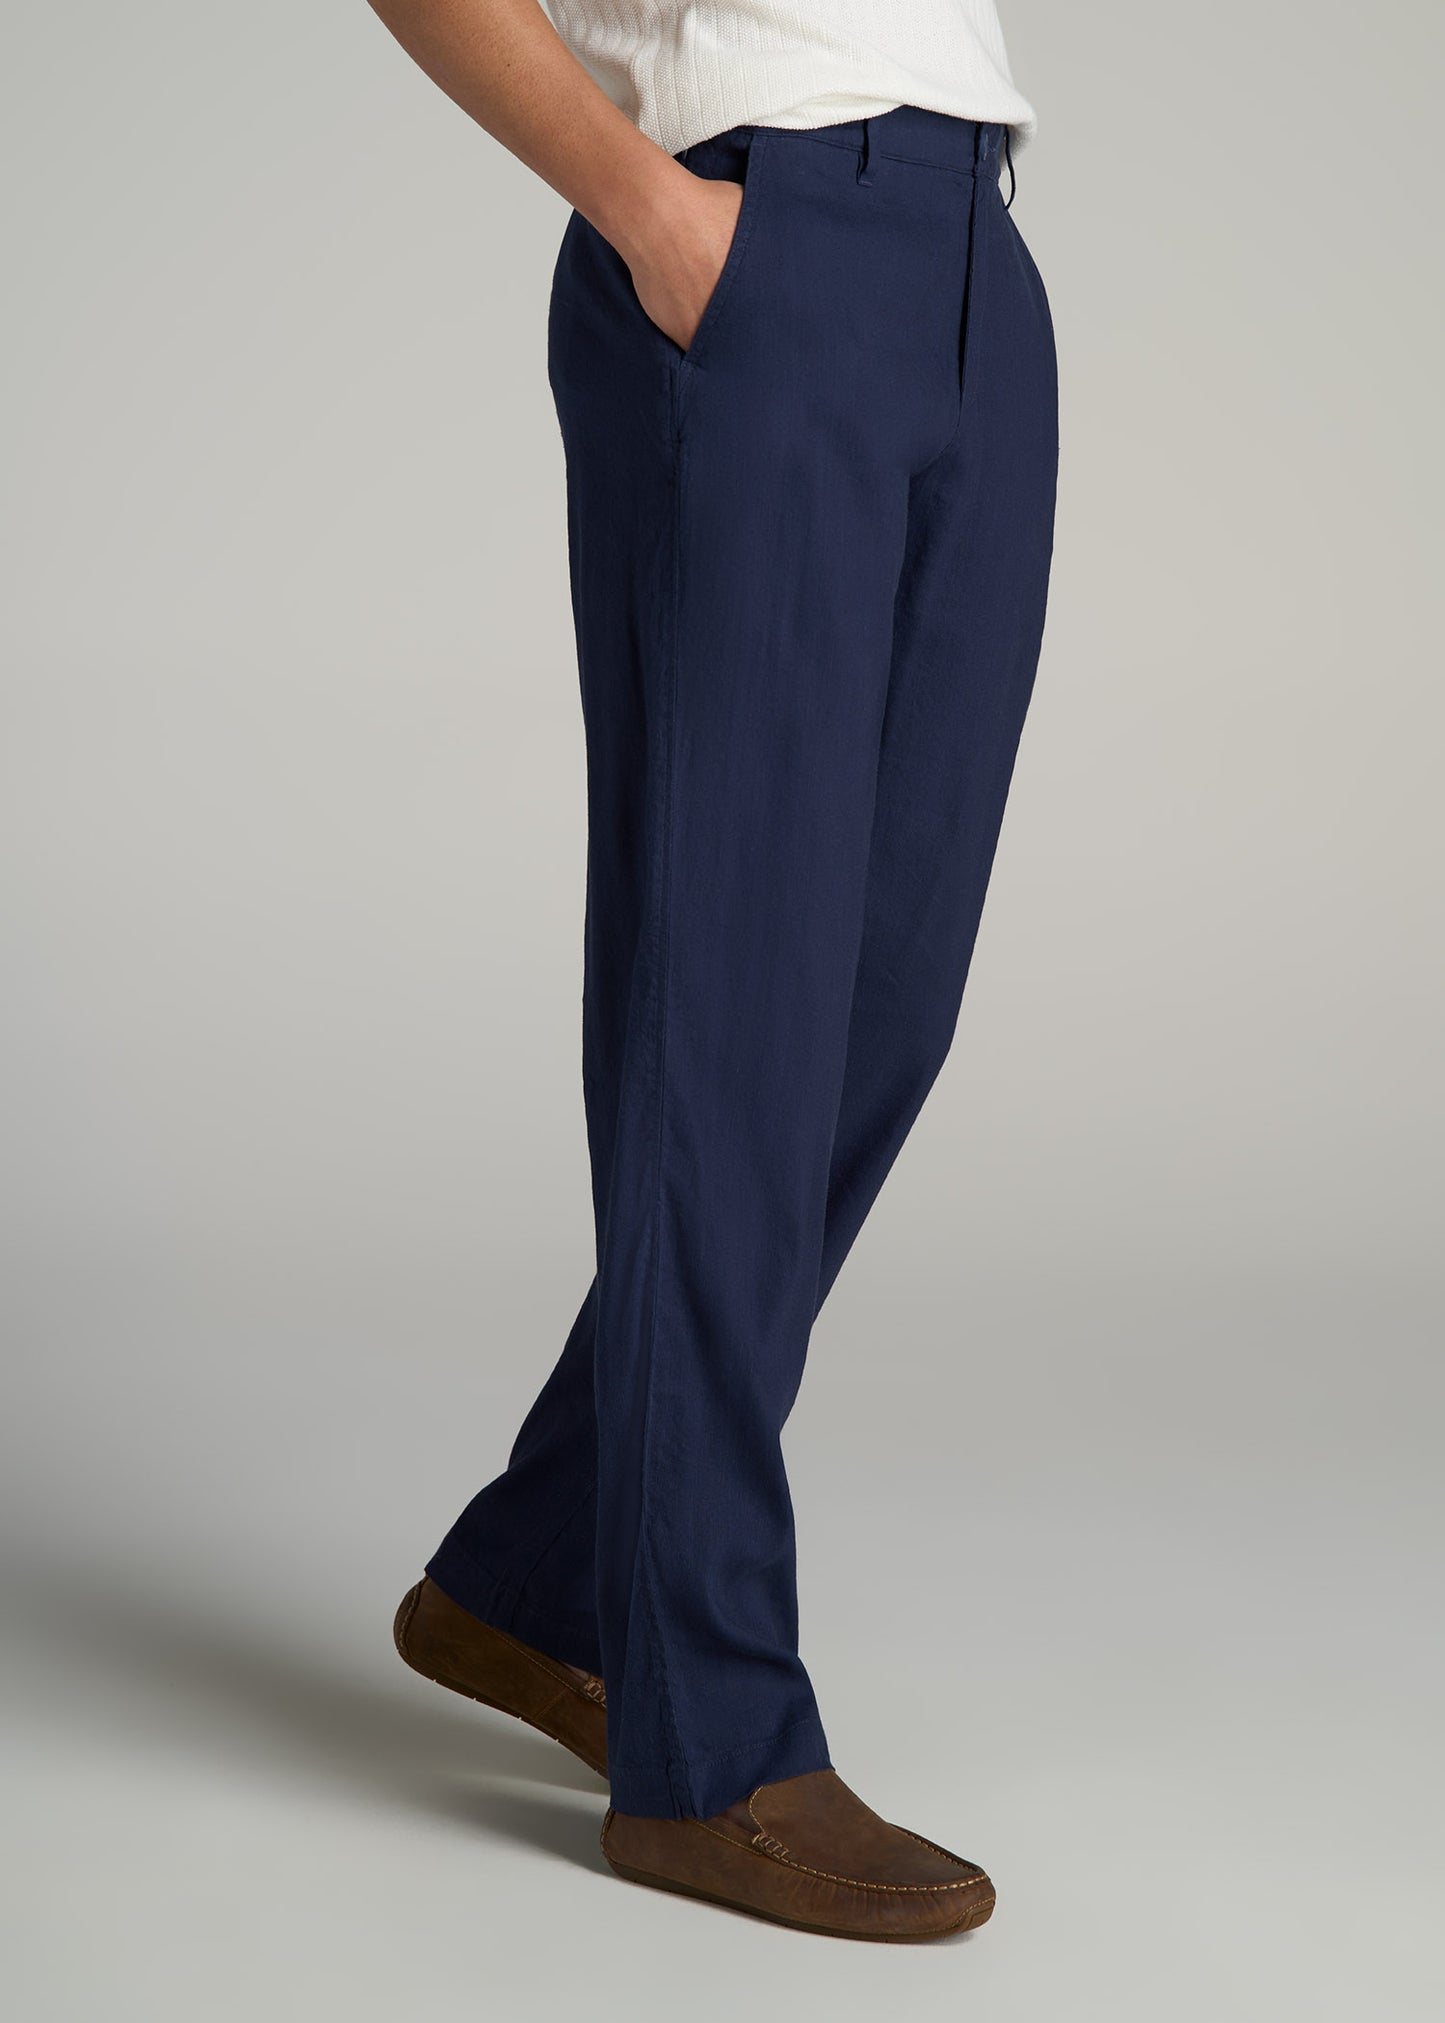 Garment Dyed Linen Casual Pants for Tall Men in Summer Blue